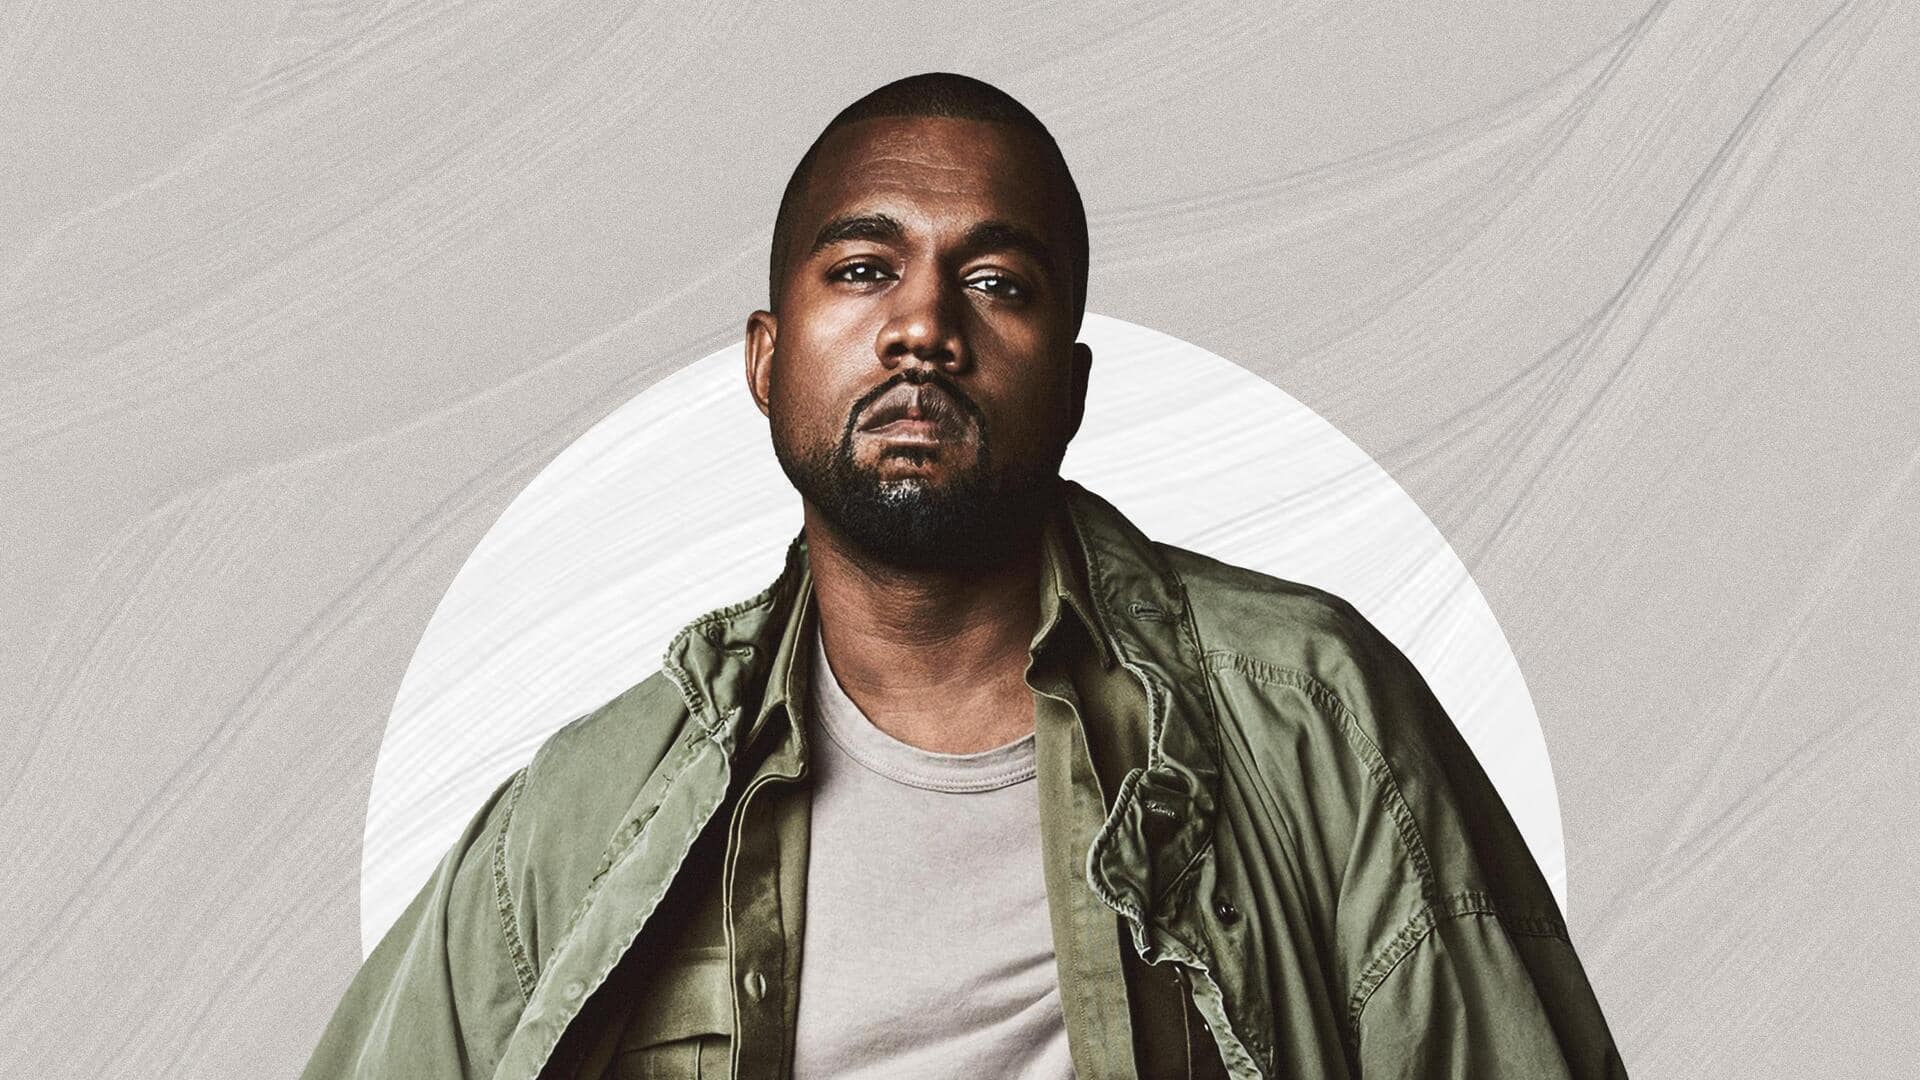 Instagram to Grammys: Places Kanye West has been banned from